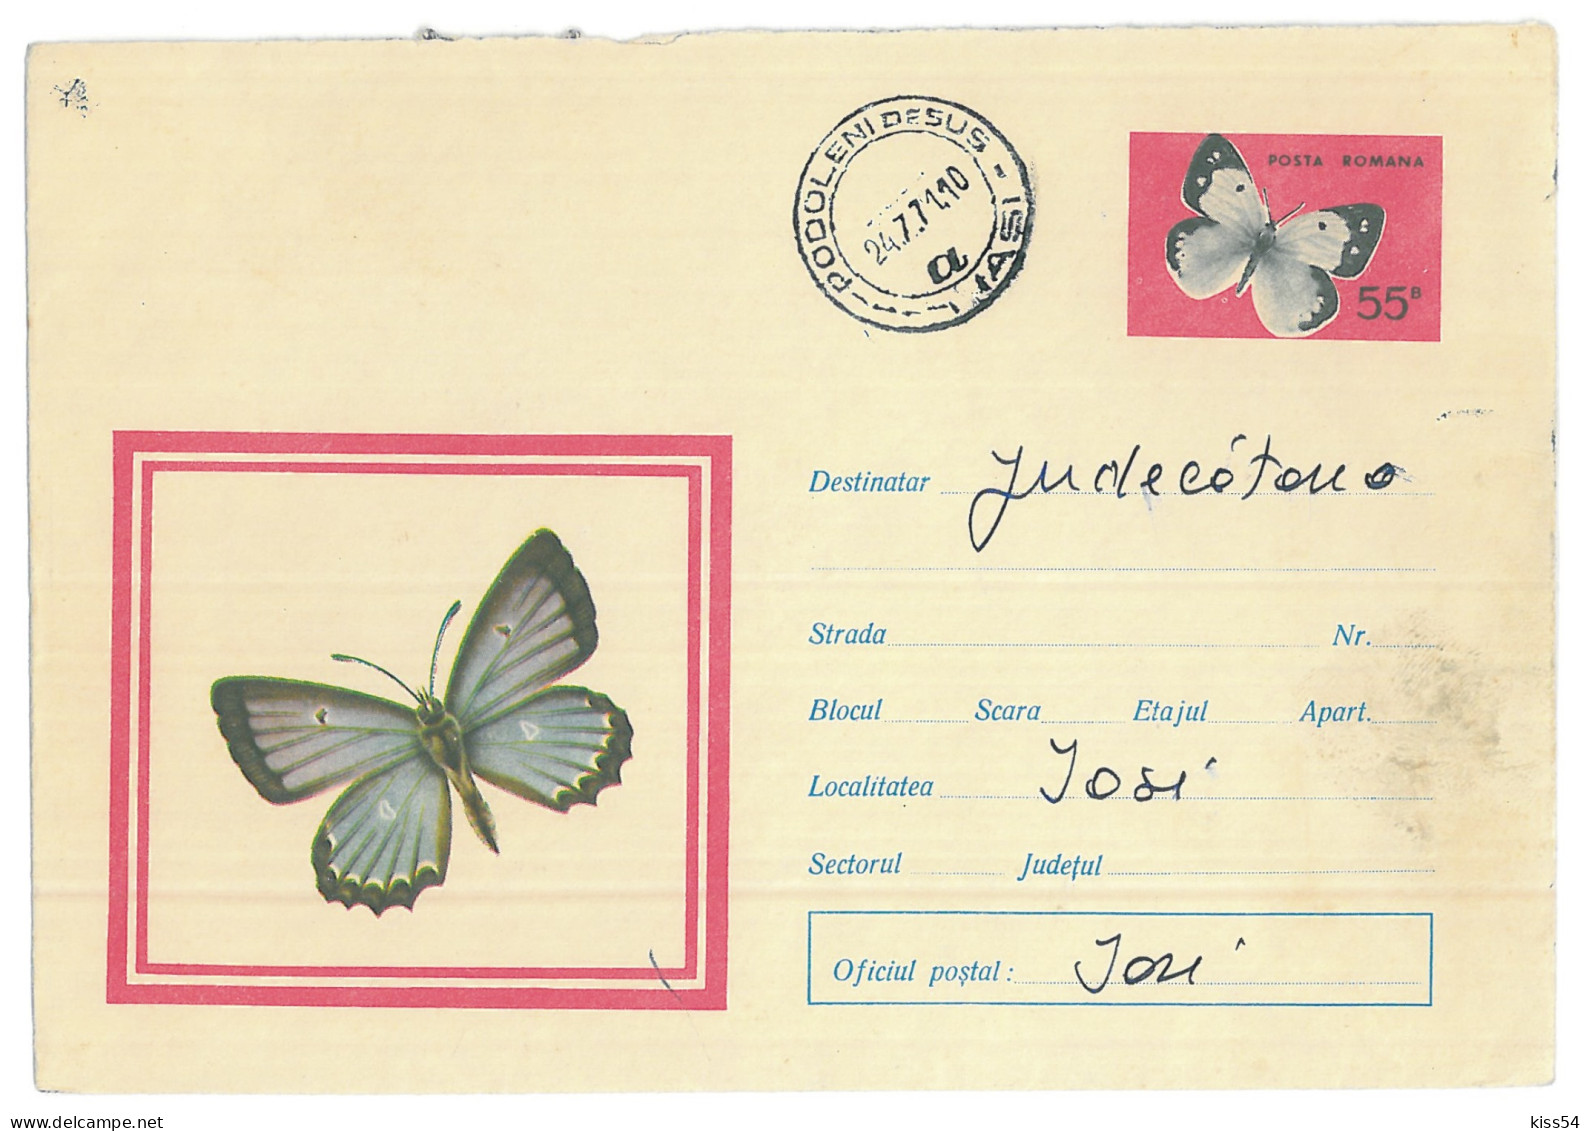 IP 71 - 0478 BUTTERFLY, Romania - Stationery - Used - 1971 - Postal Stationery